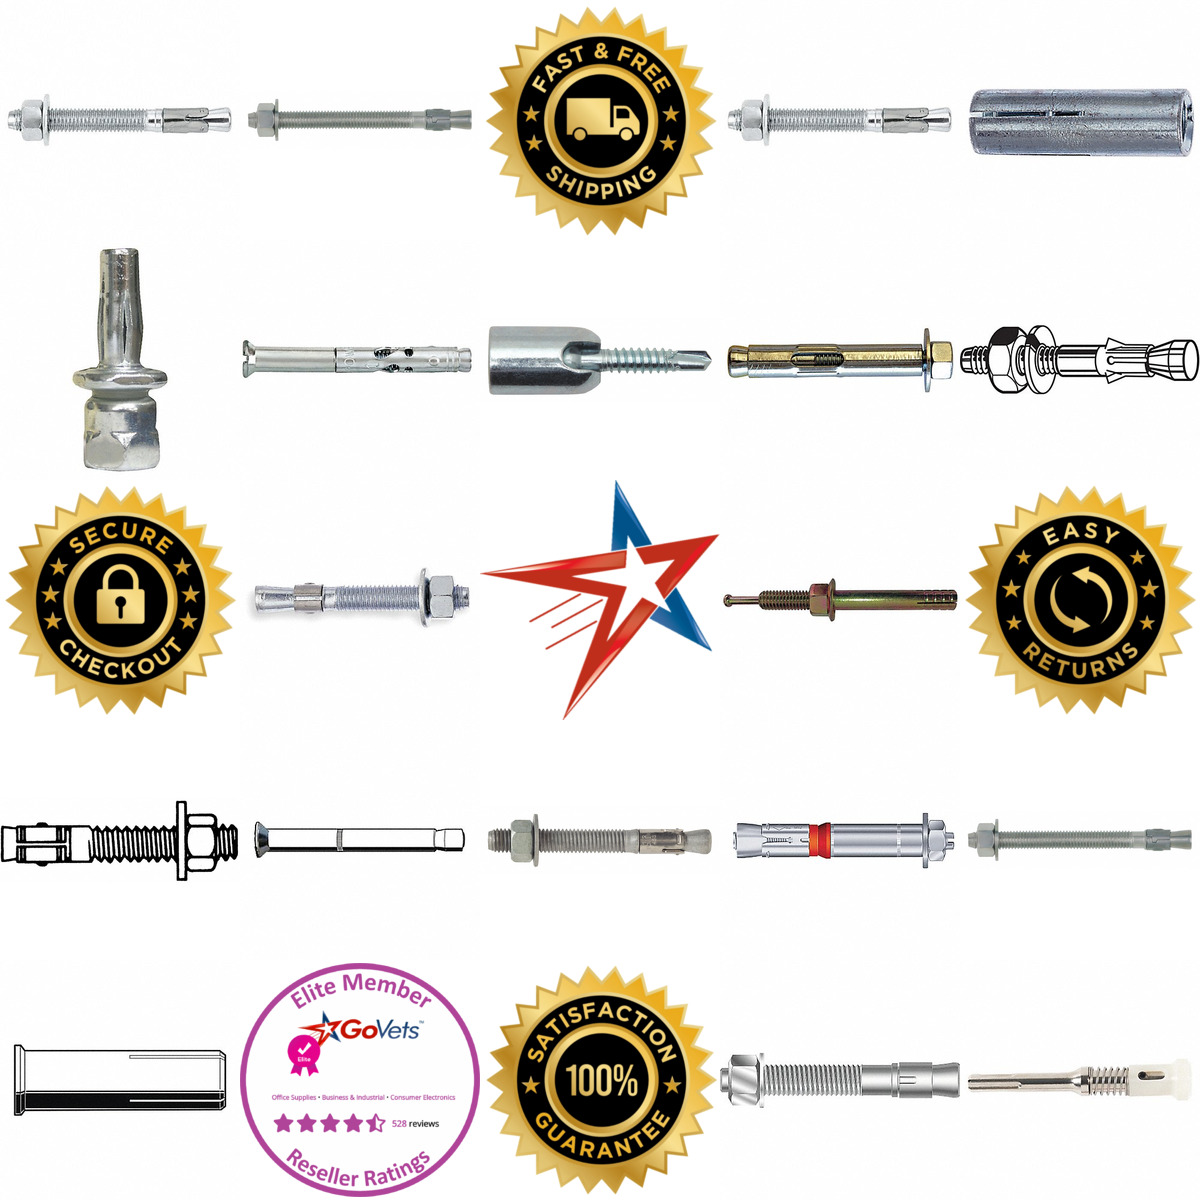 A selection of Anchors products on GoVets